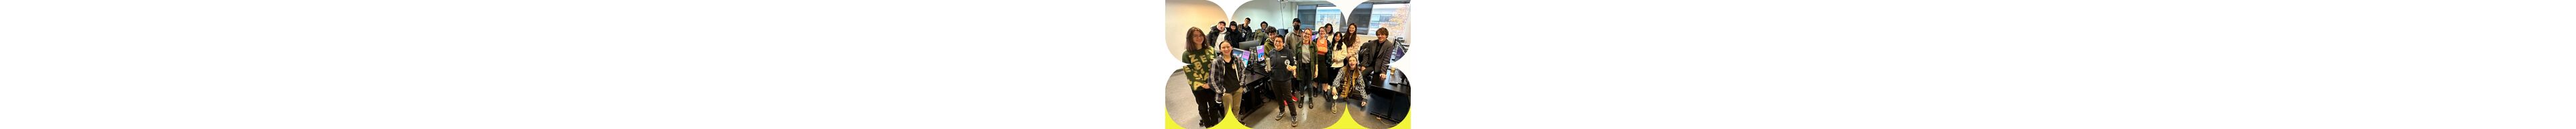 A diverse group of students sharing a joyful moment in a computer lab, celebrating creativity and collaboration.